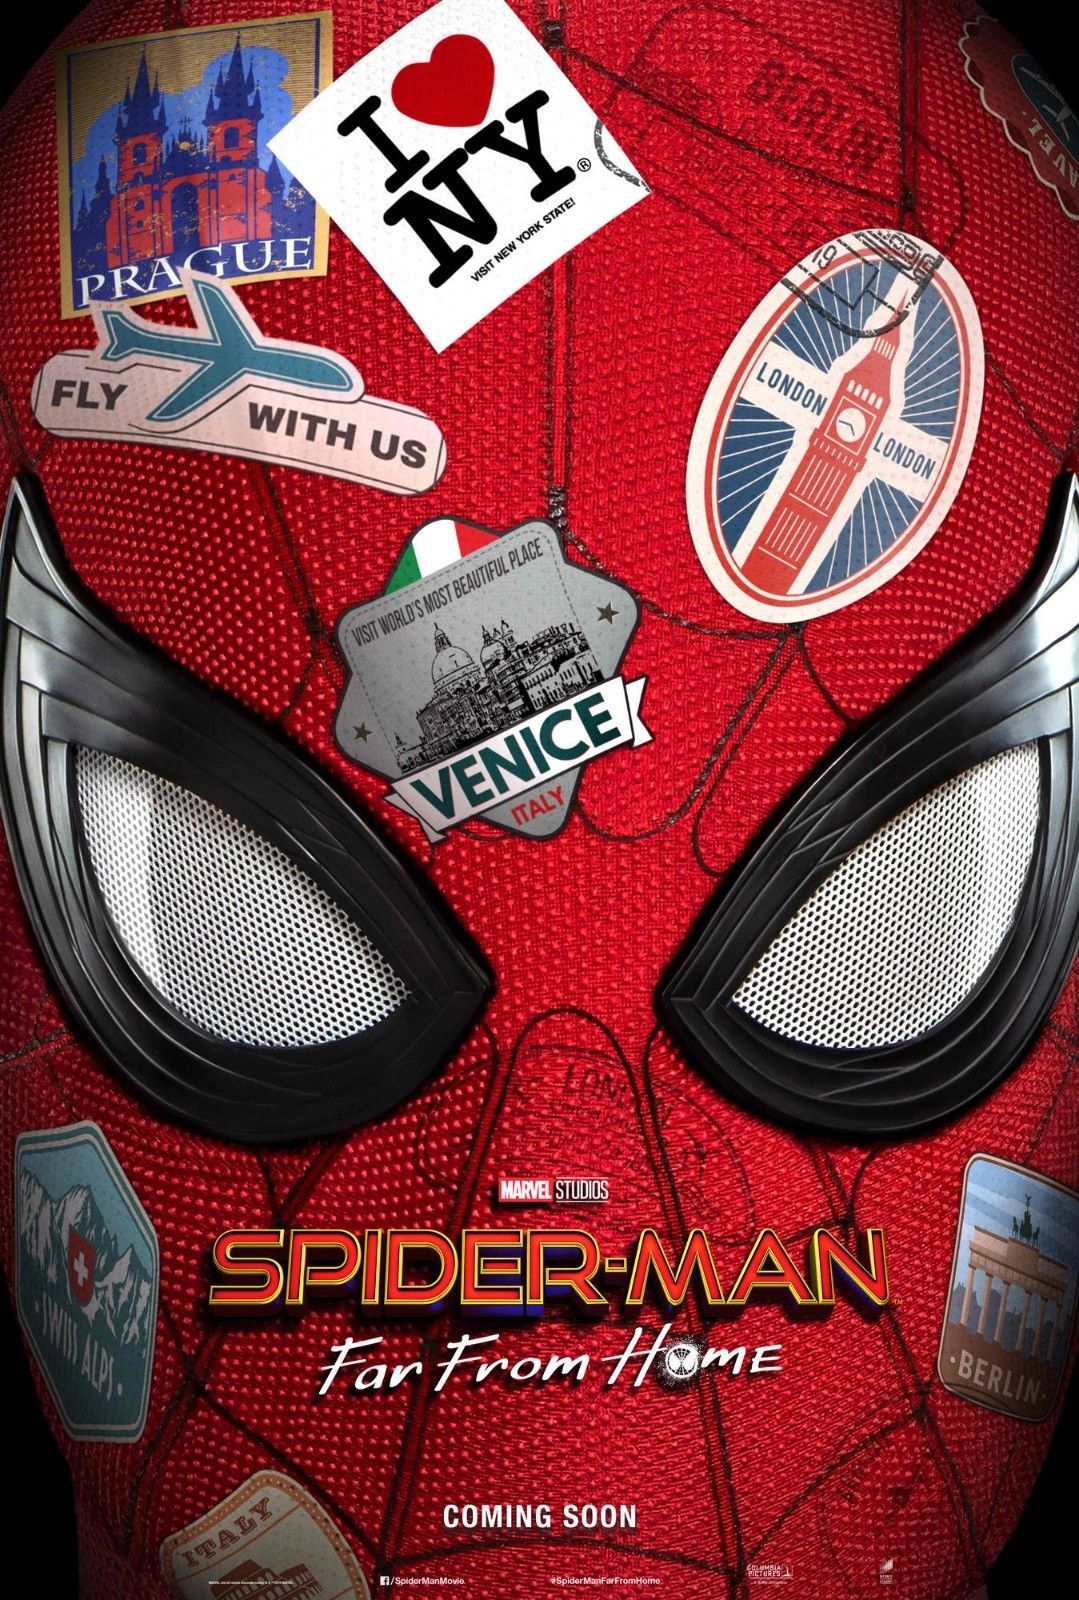 Spider man Far From Home Movie Poster 24x36 27x40 32x48 Marvel Art Print